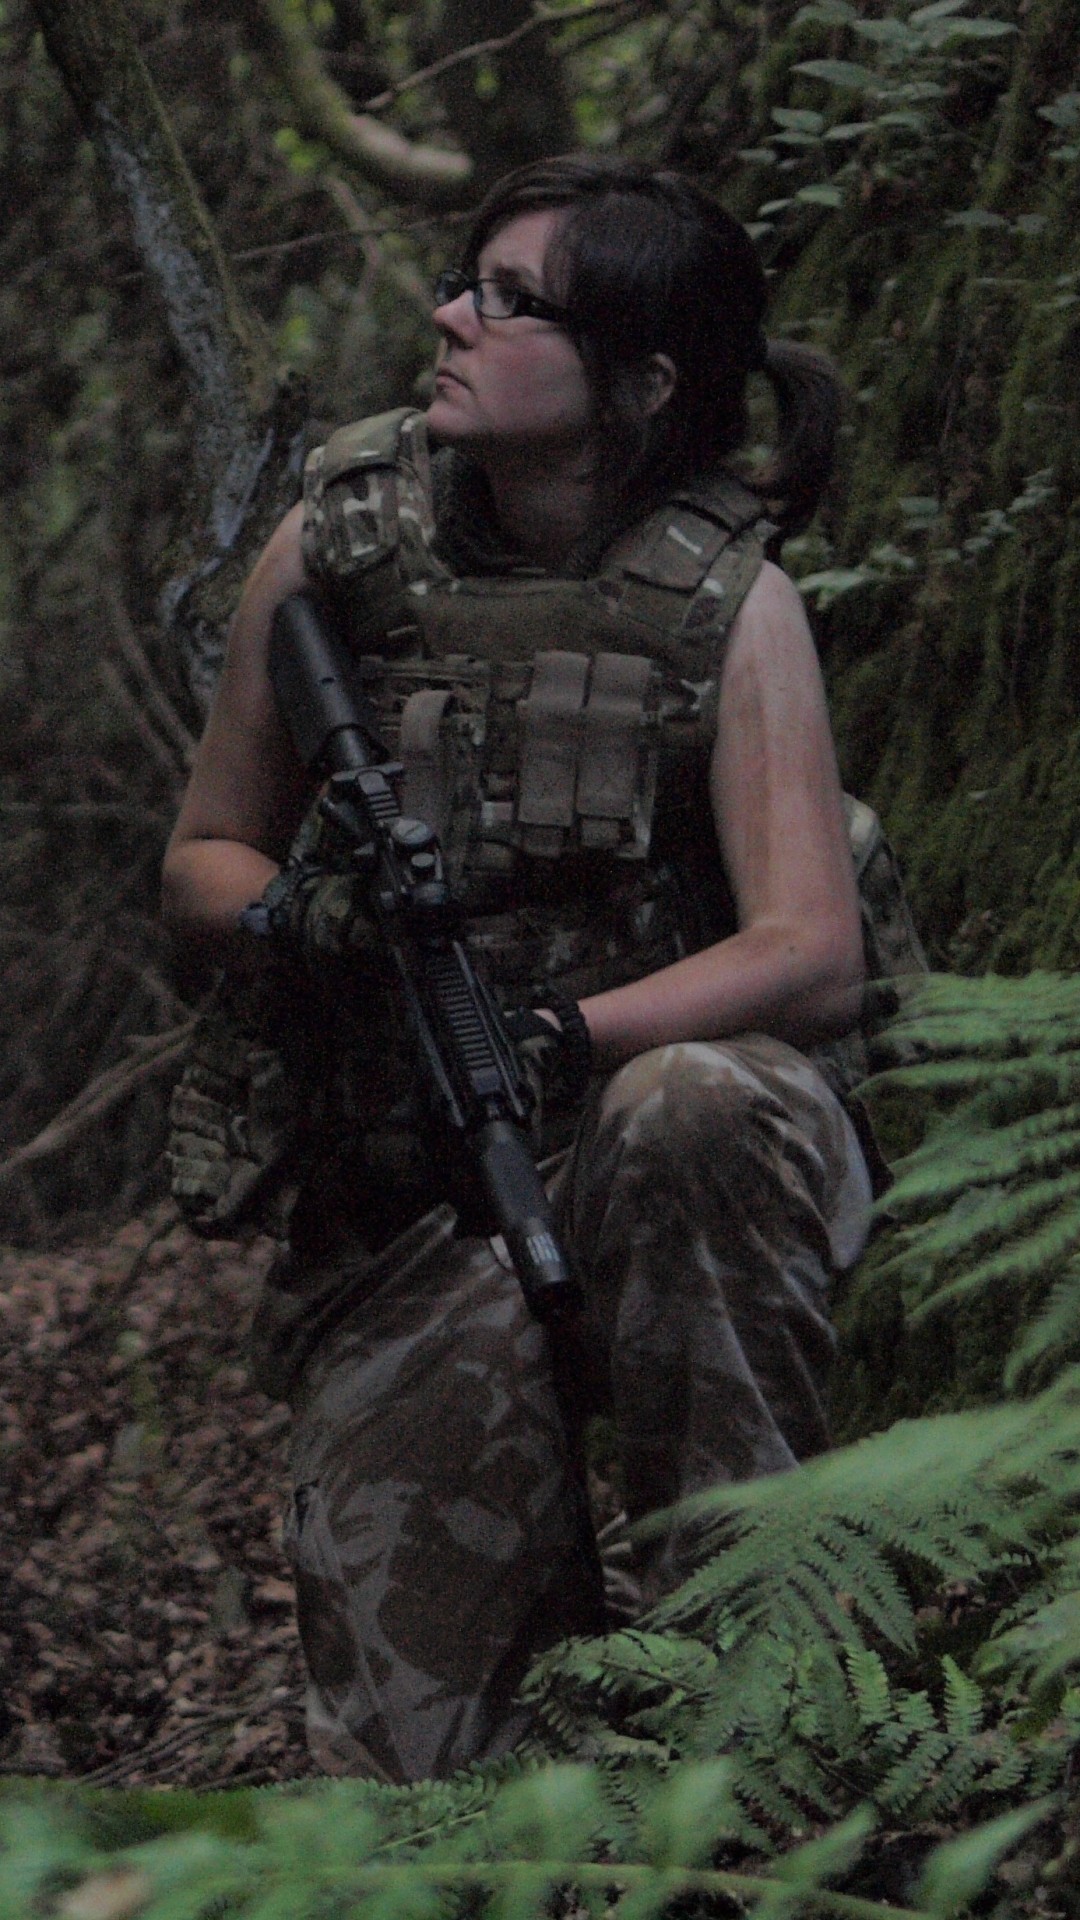 girls and guns wallpaper,soldier,jungle,camouflage,military camouflage,airsoft